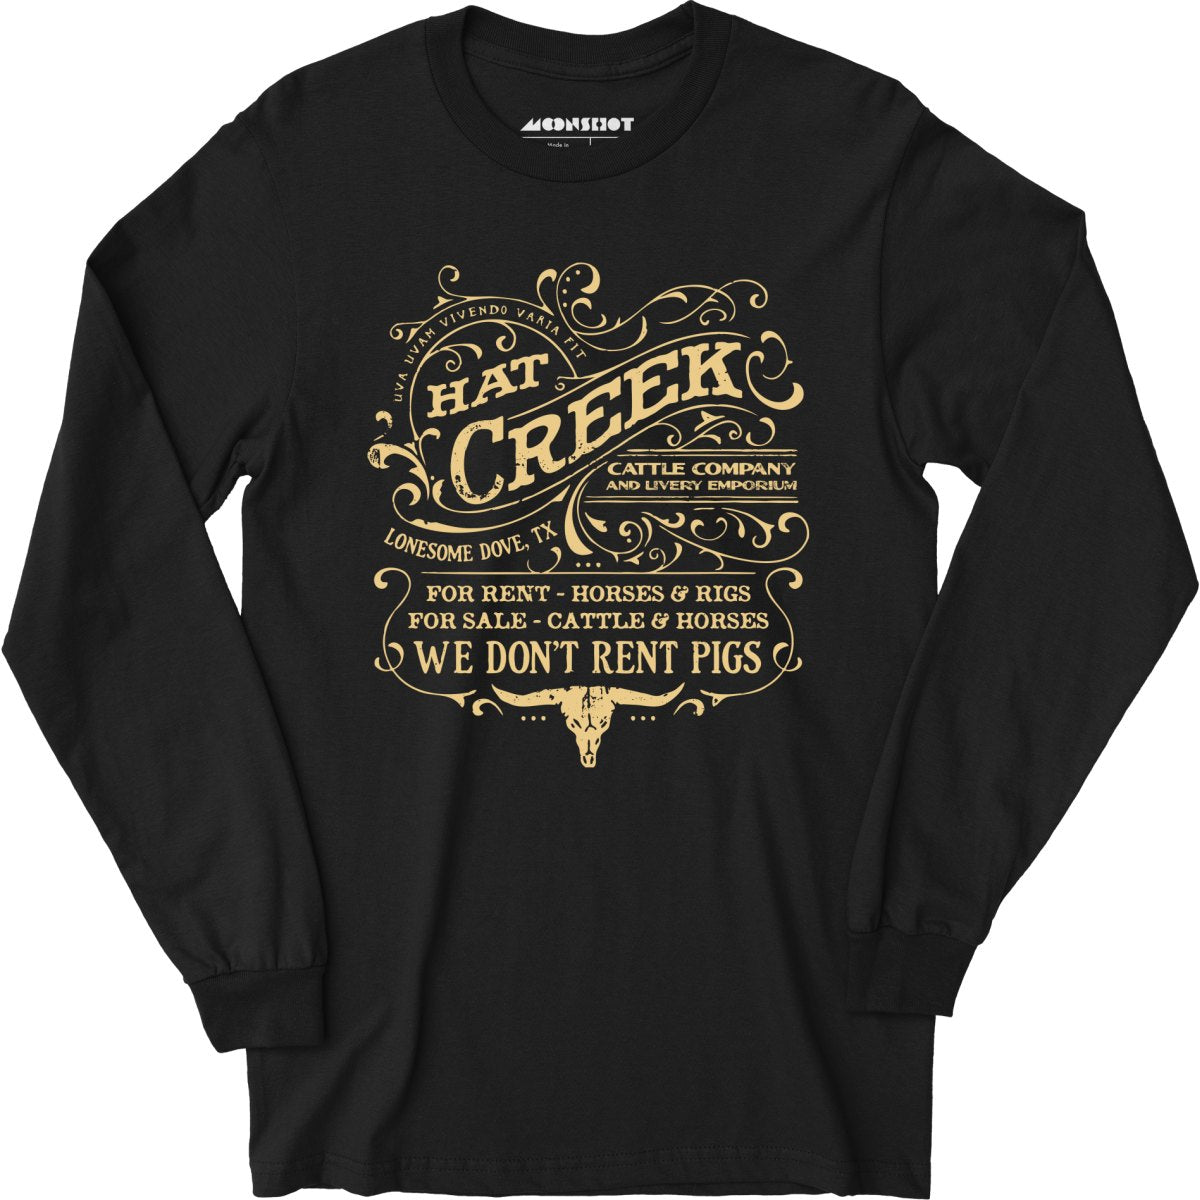 Hat Creek Cattle Company - Lonesome Dove, TX - Long Sleeve T-Shirt